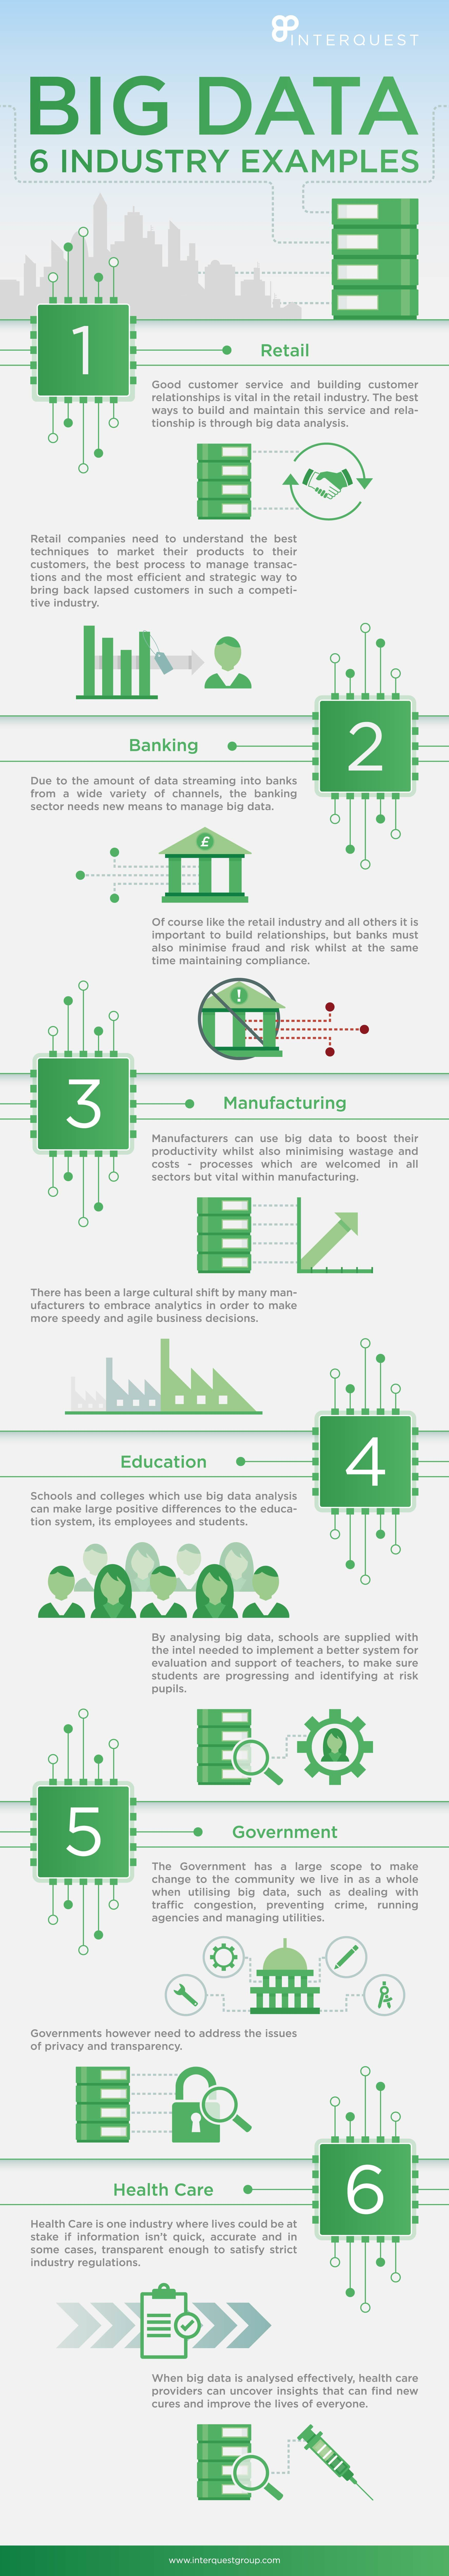 Big Data 6 Industry Examples infographic